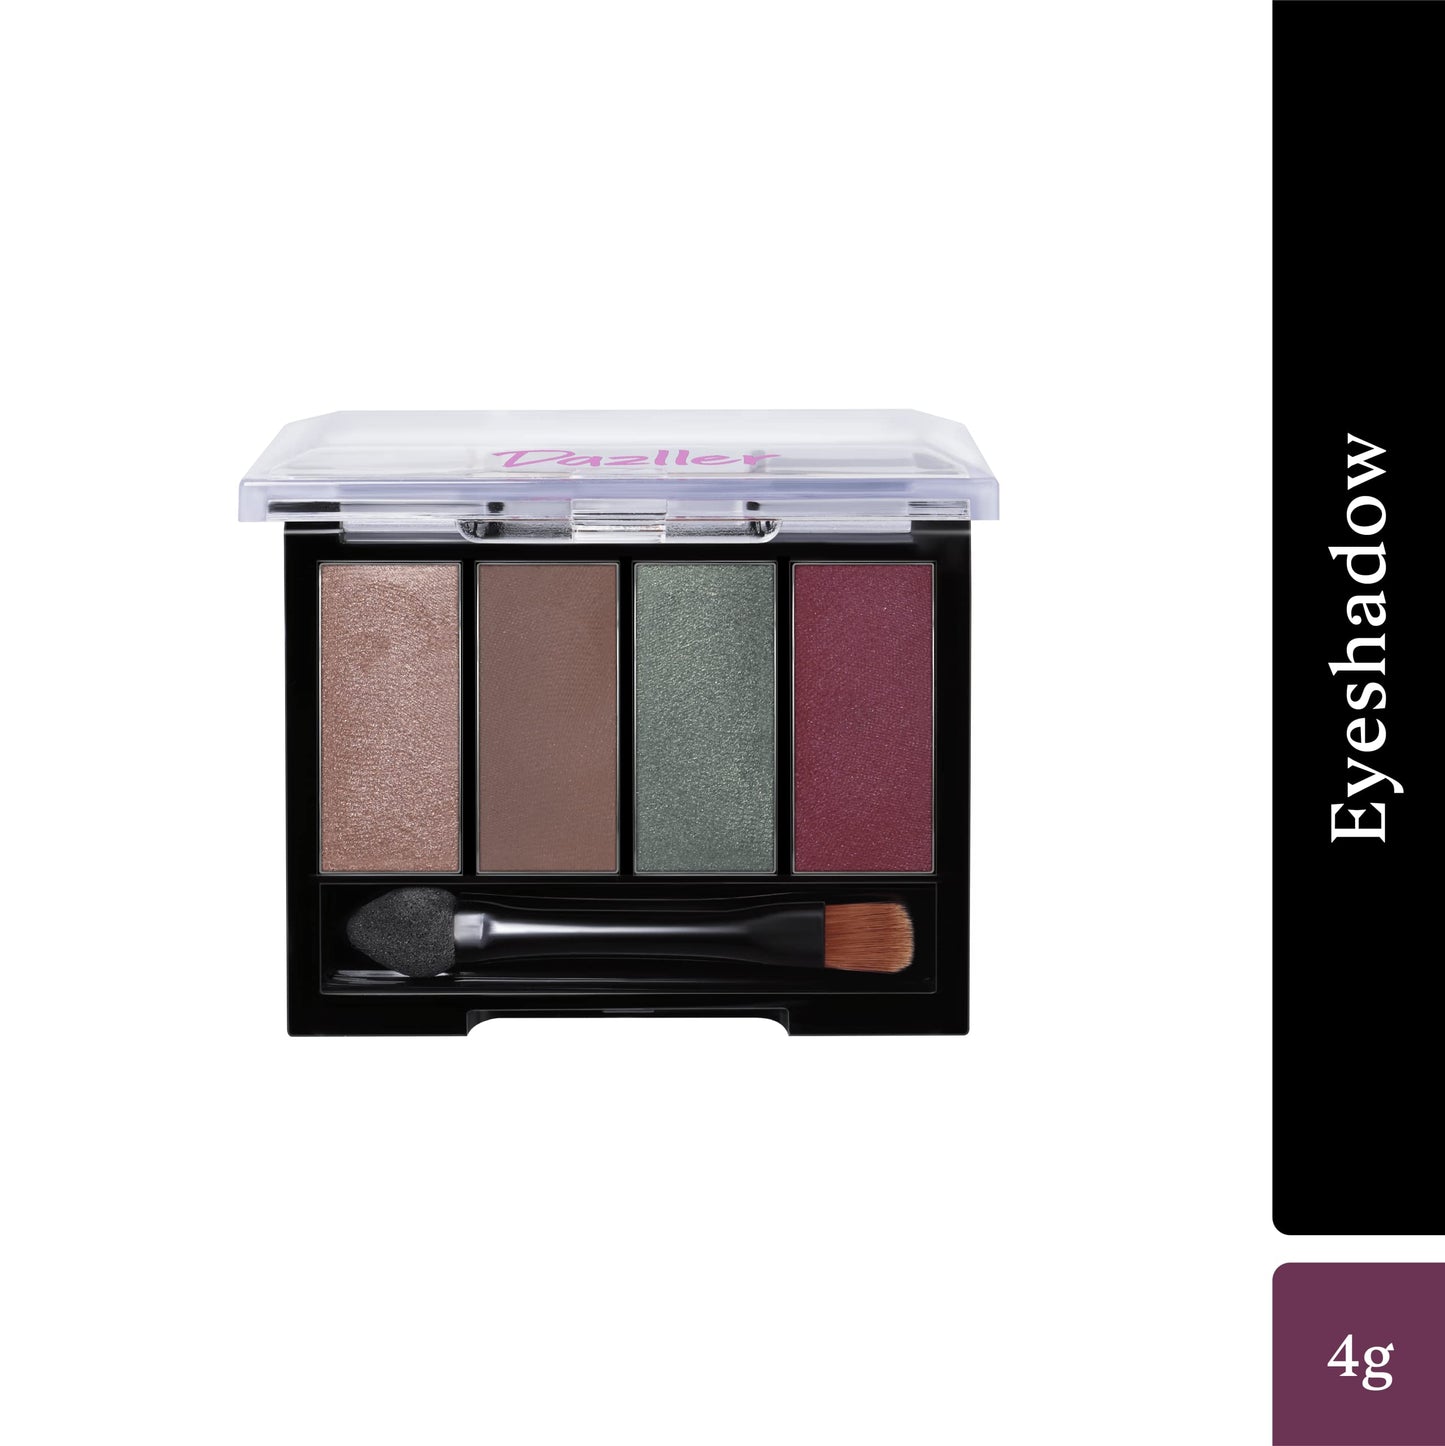 Dazller Eyeshadow 4-in1 Palette, 4g, D4-ES5-Foresto, Ultra Lightweight, Velvety, Even Blending, Rich Pigments, Vibrant Hues, No caking, Zero Patchiness, Vegan & Cruelty-free 